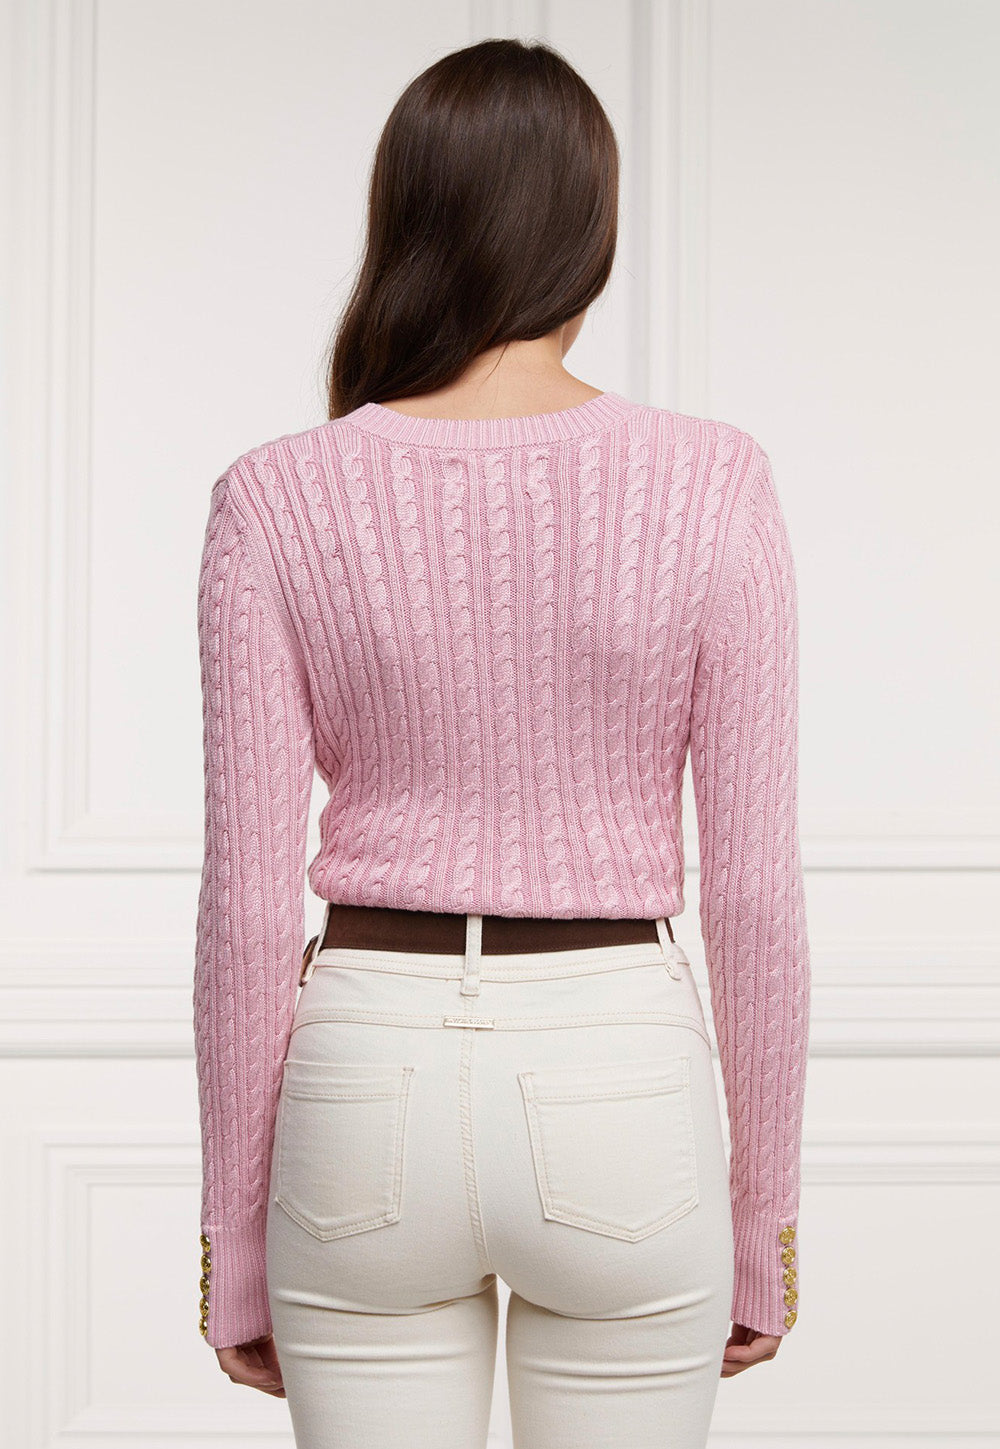 Seattle Cable V-Neck Knit - Blush sold by Angel Divine